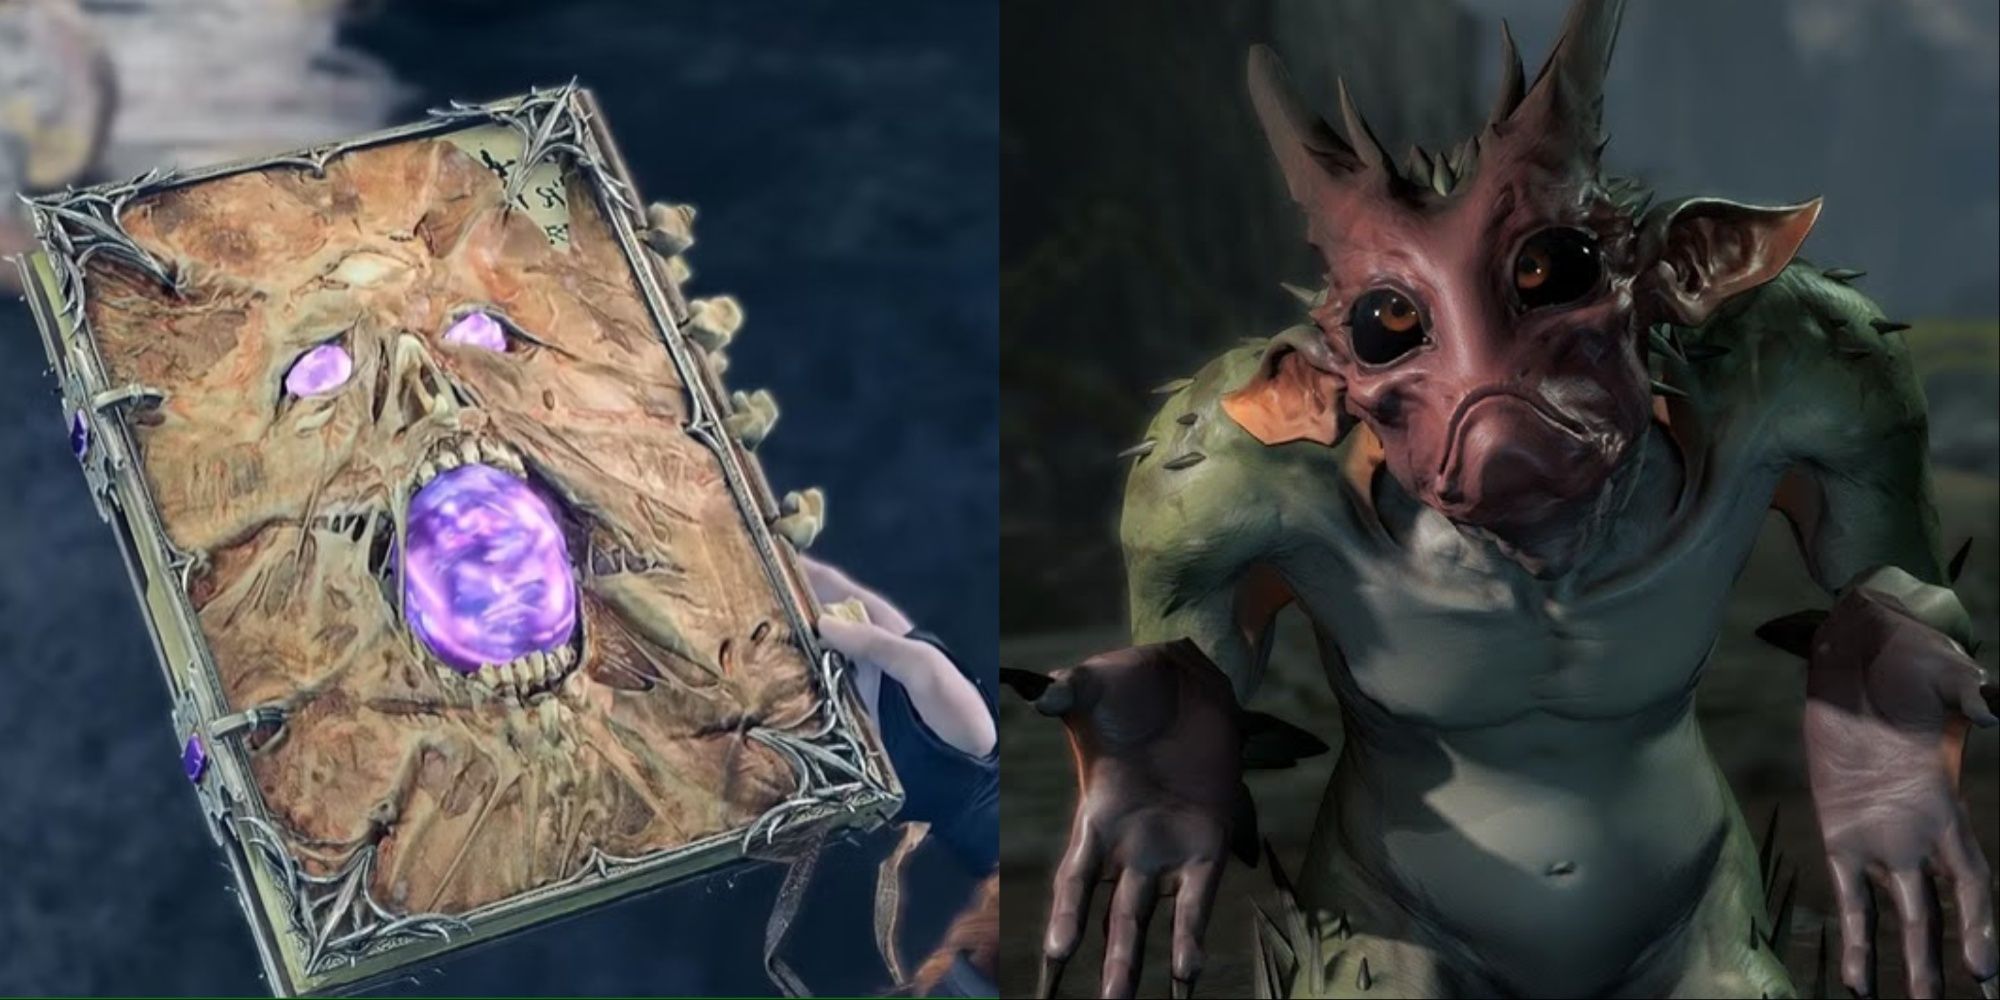 split image showing a necromancy book and a quasit from baldur's gate 3